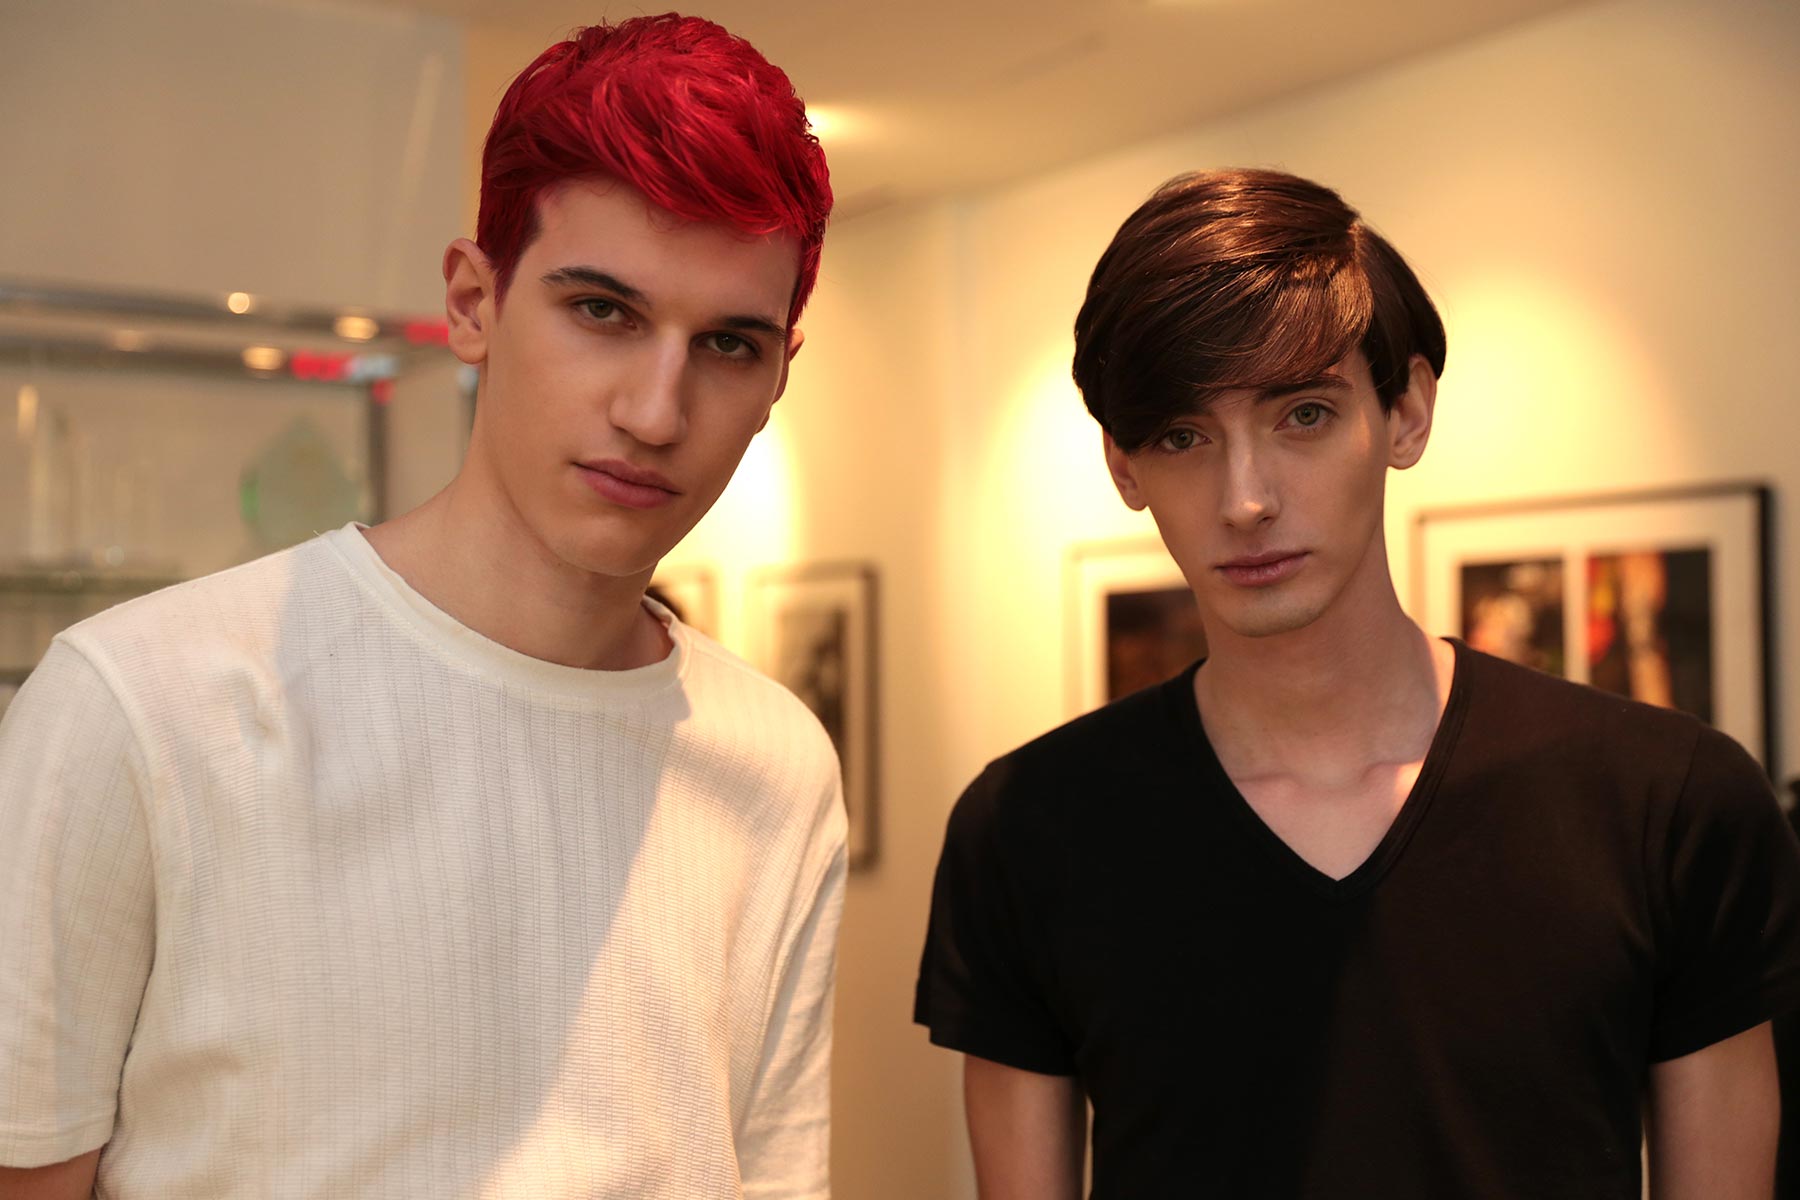 Behind the scenes at RICARDO SECO S/S 2015 New York Fashion Week